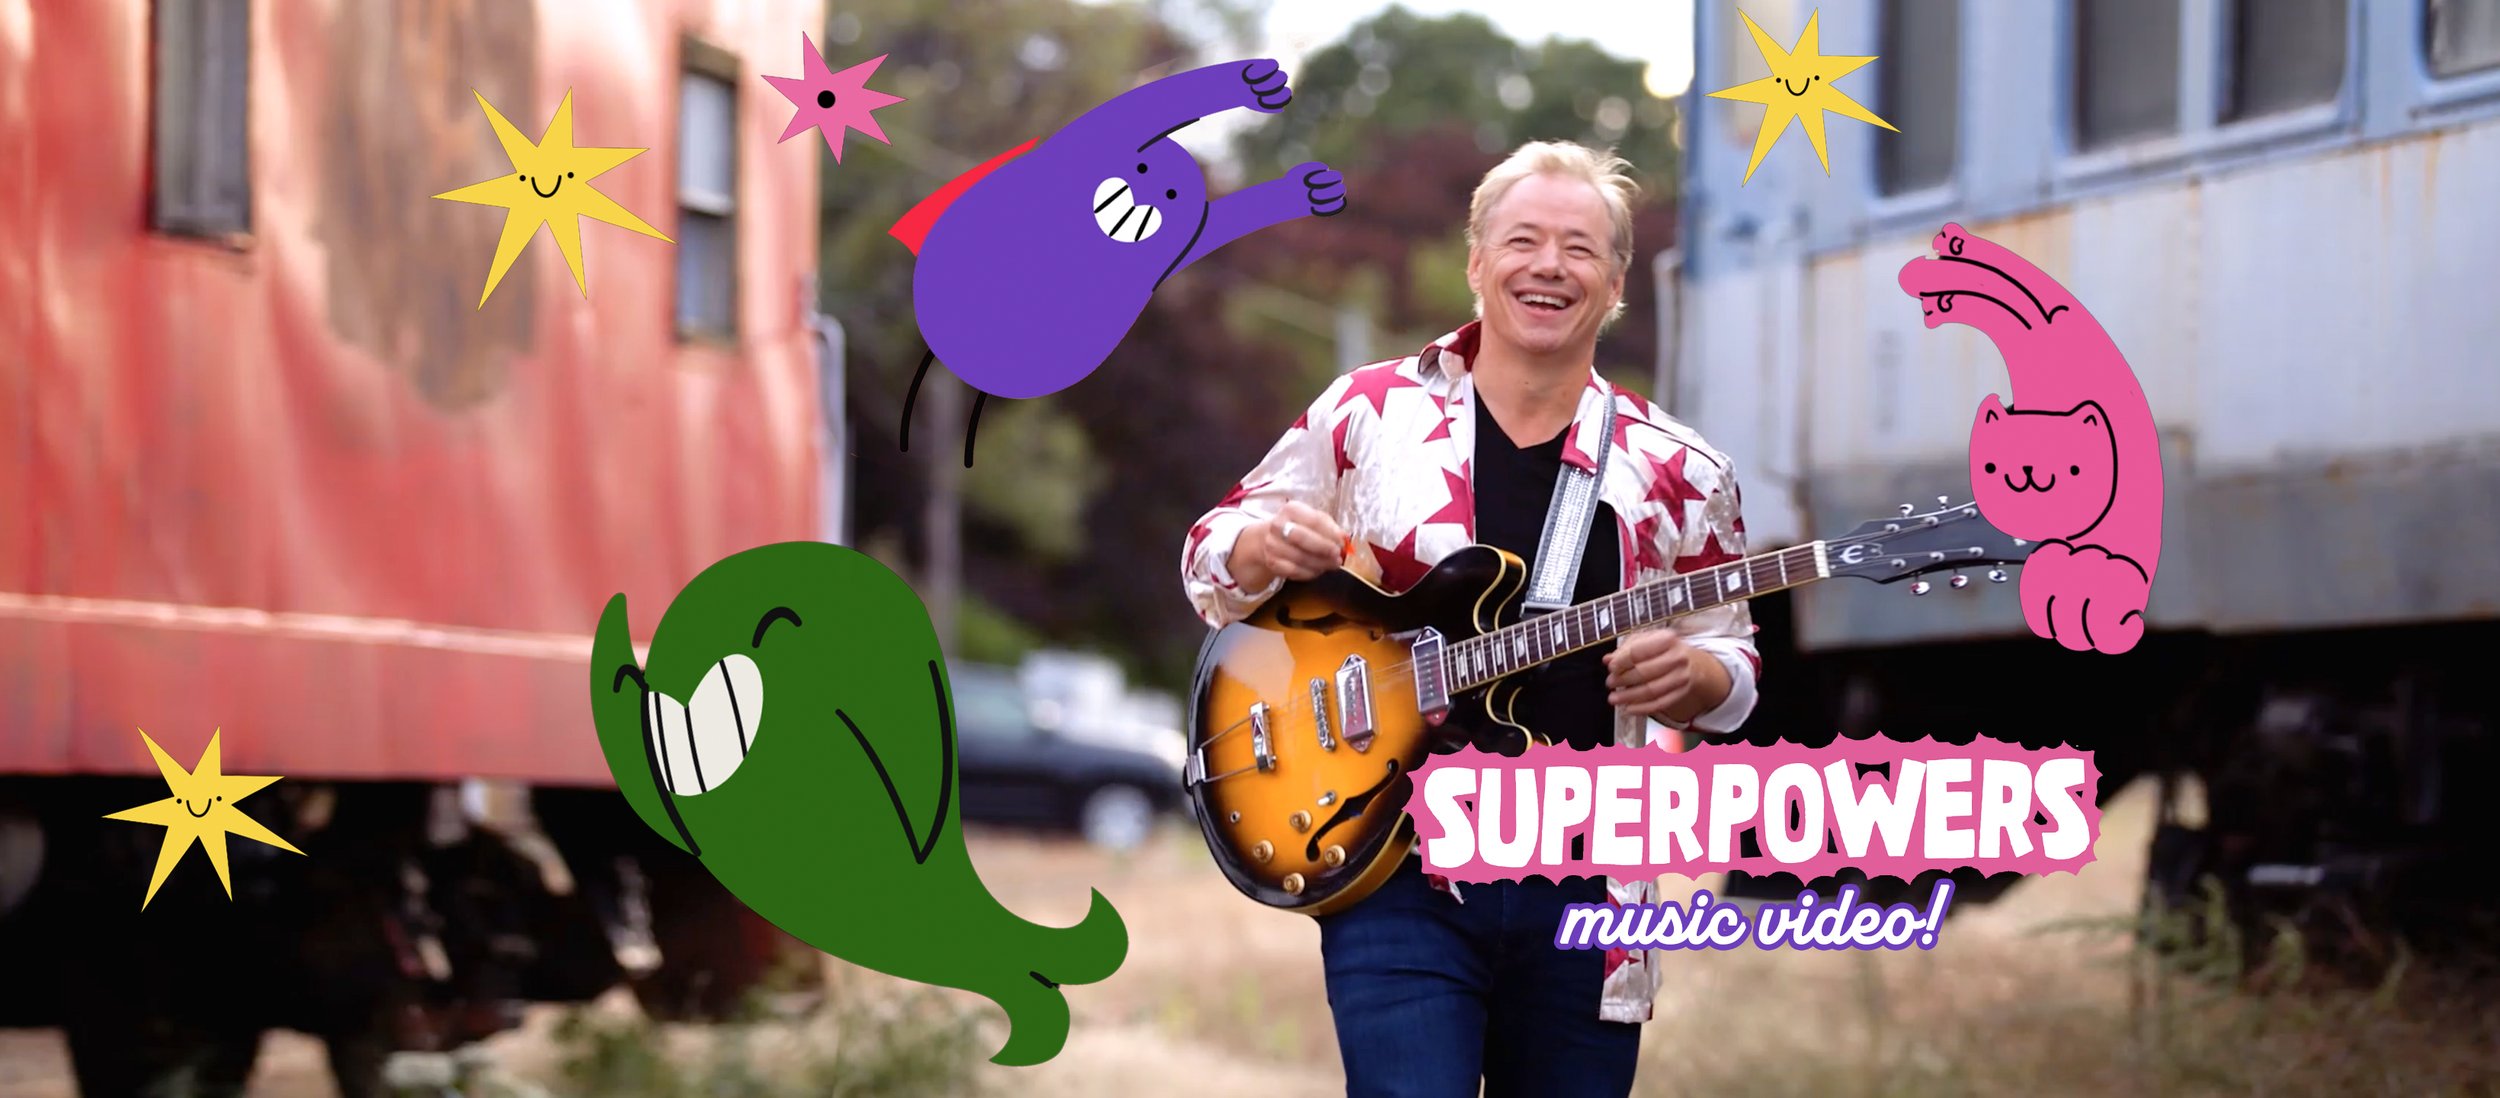 Superpowers NEW MASTER FB cover animation copy.jpg